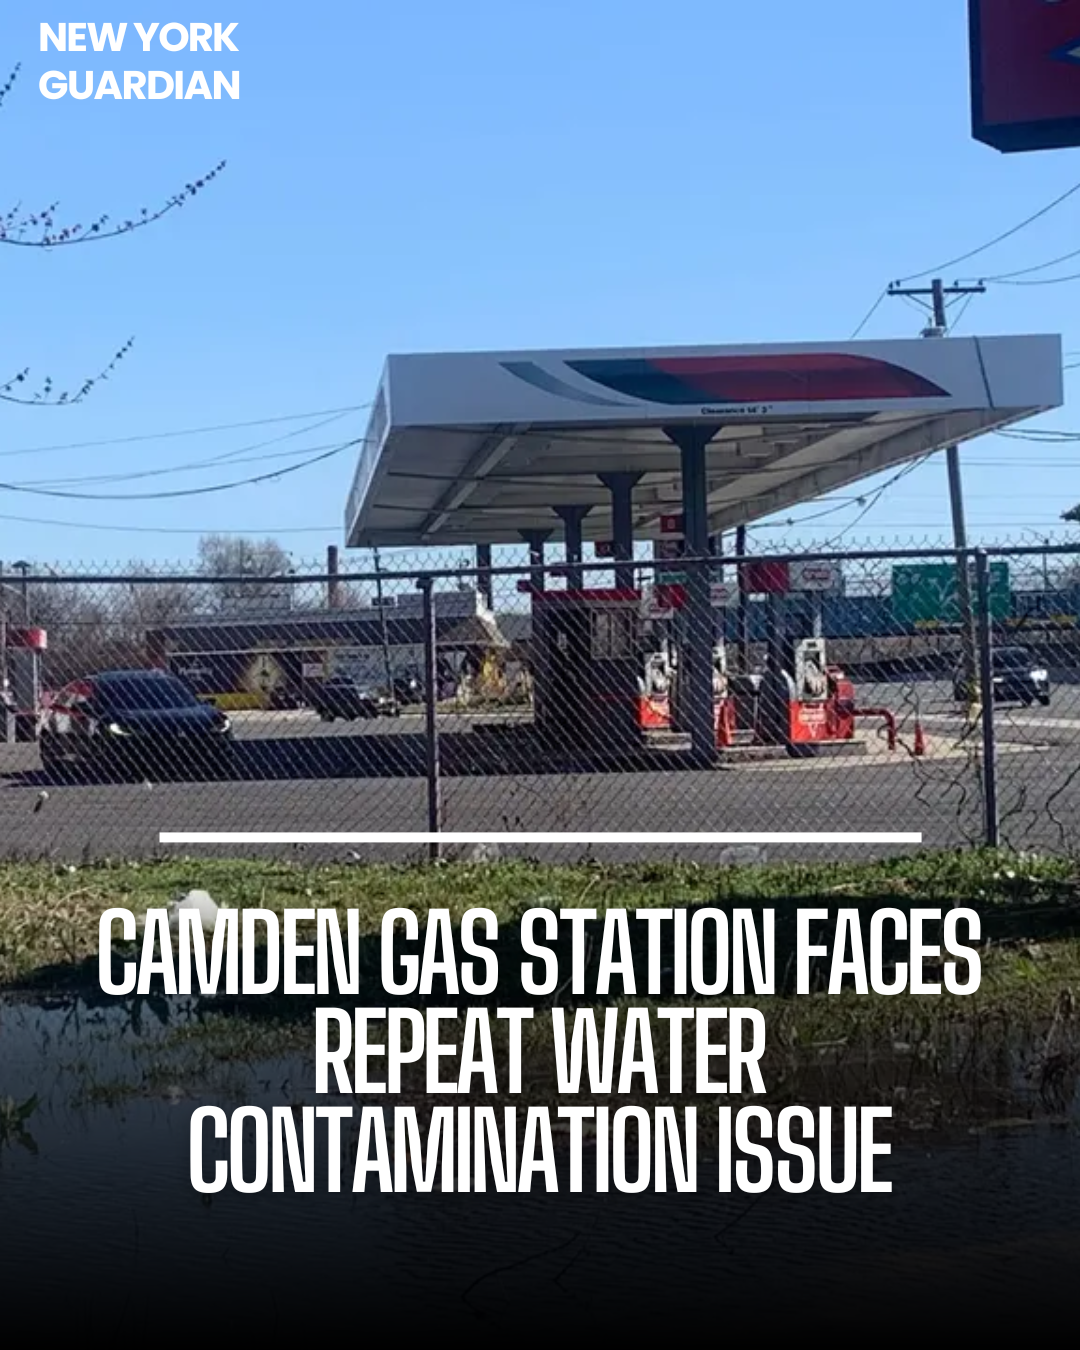 Once again, a Conoco petrol station in Camden, New Jersey, has been chastised for water pollution in its fuel lines.